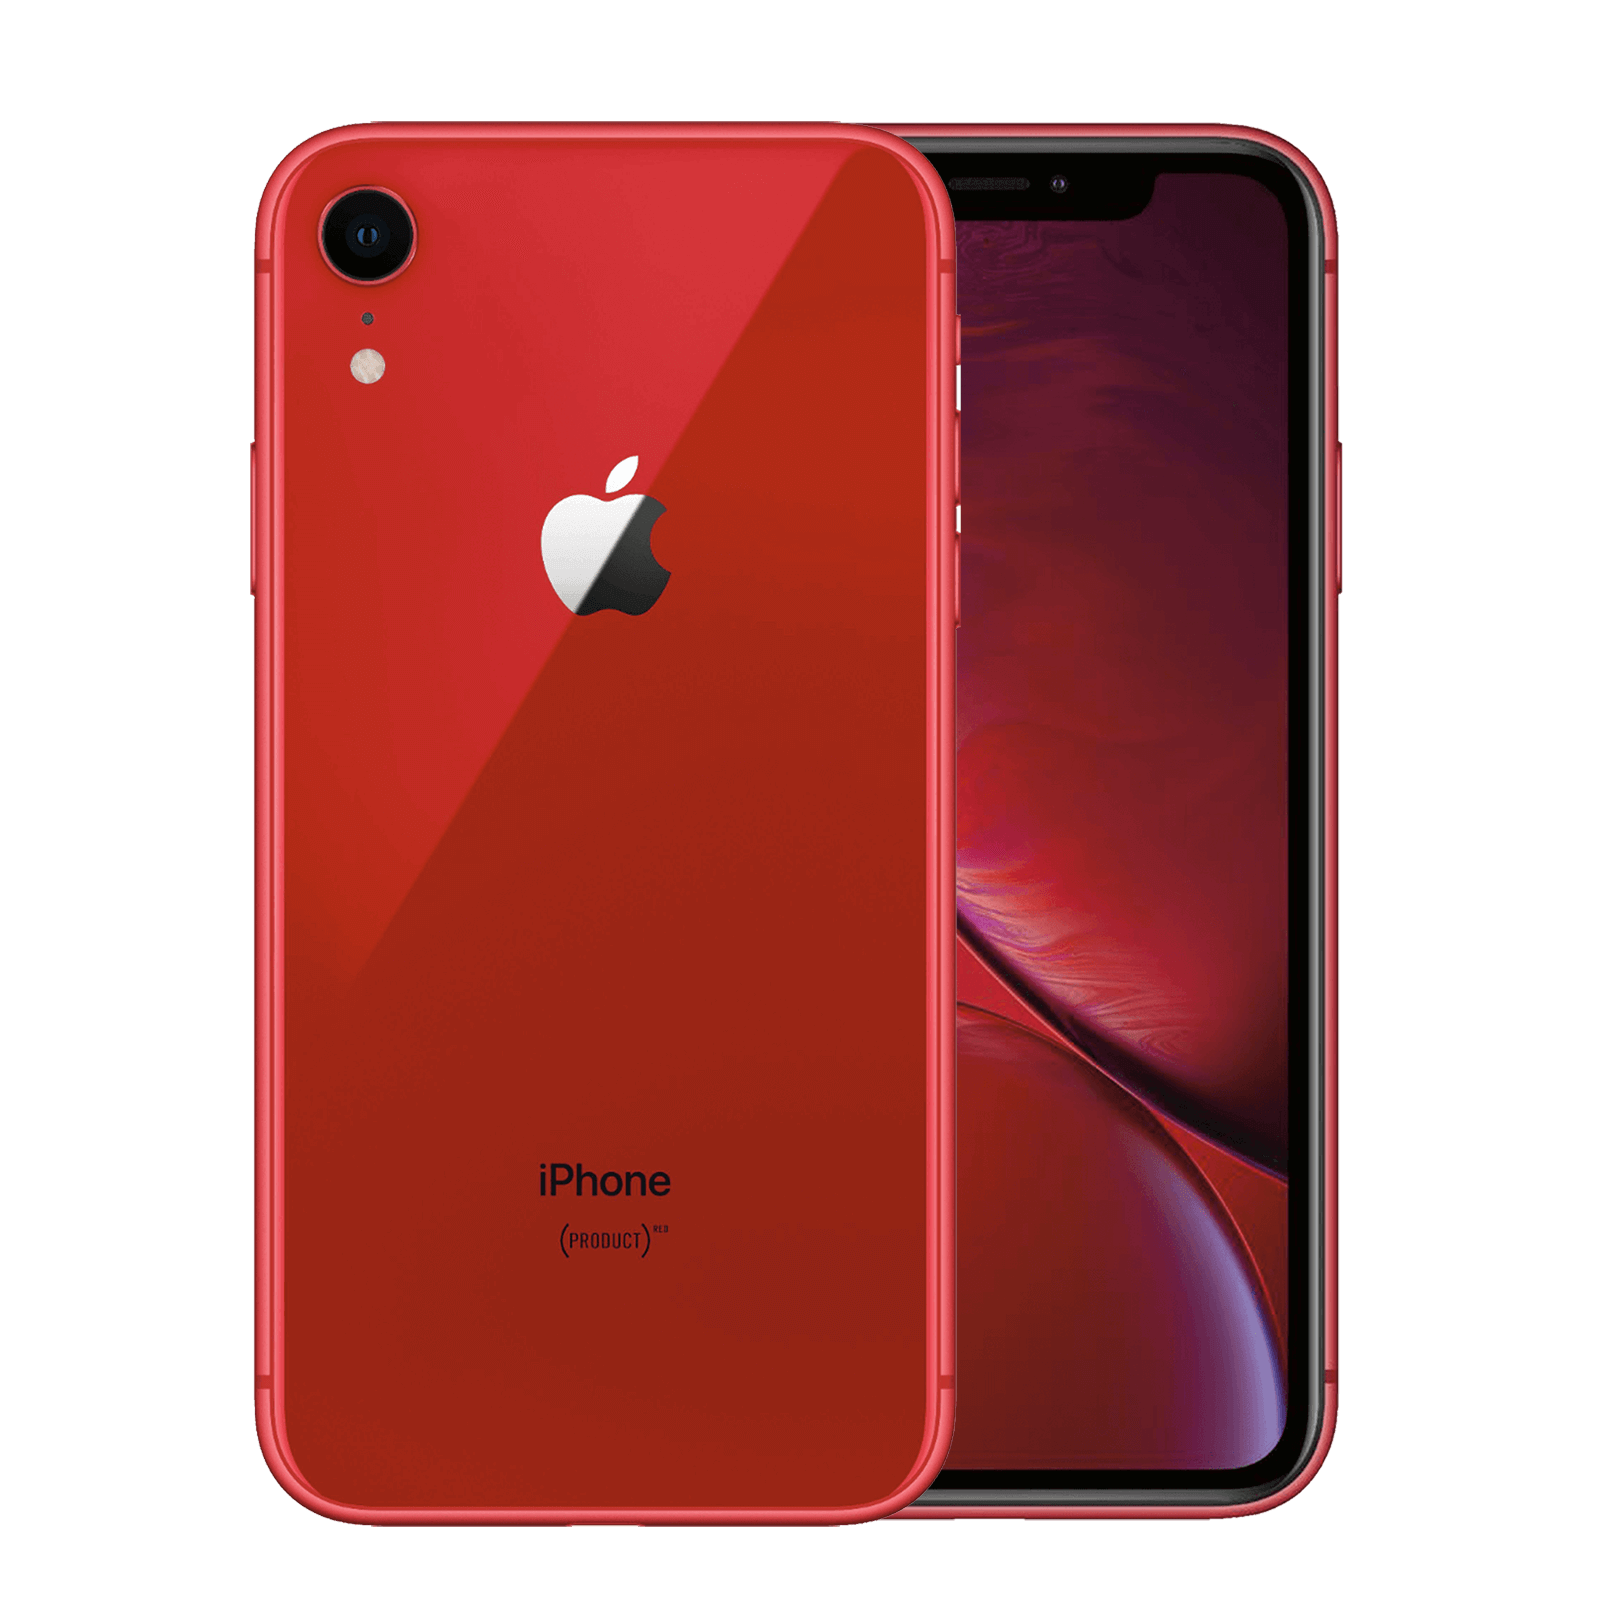 Apple iPhone XR 64GB Product Red Very Good - Sprint